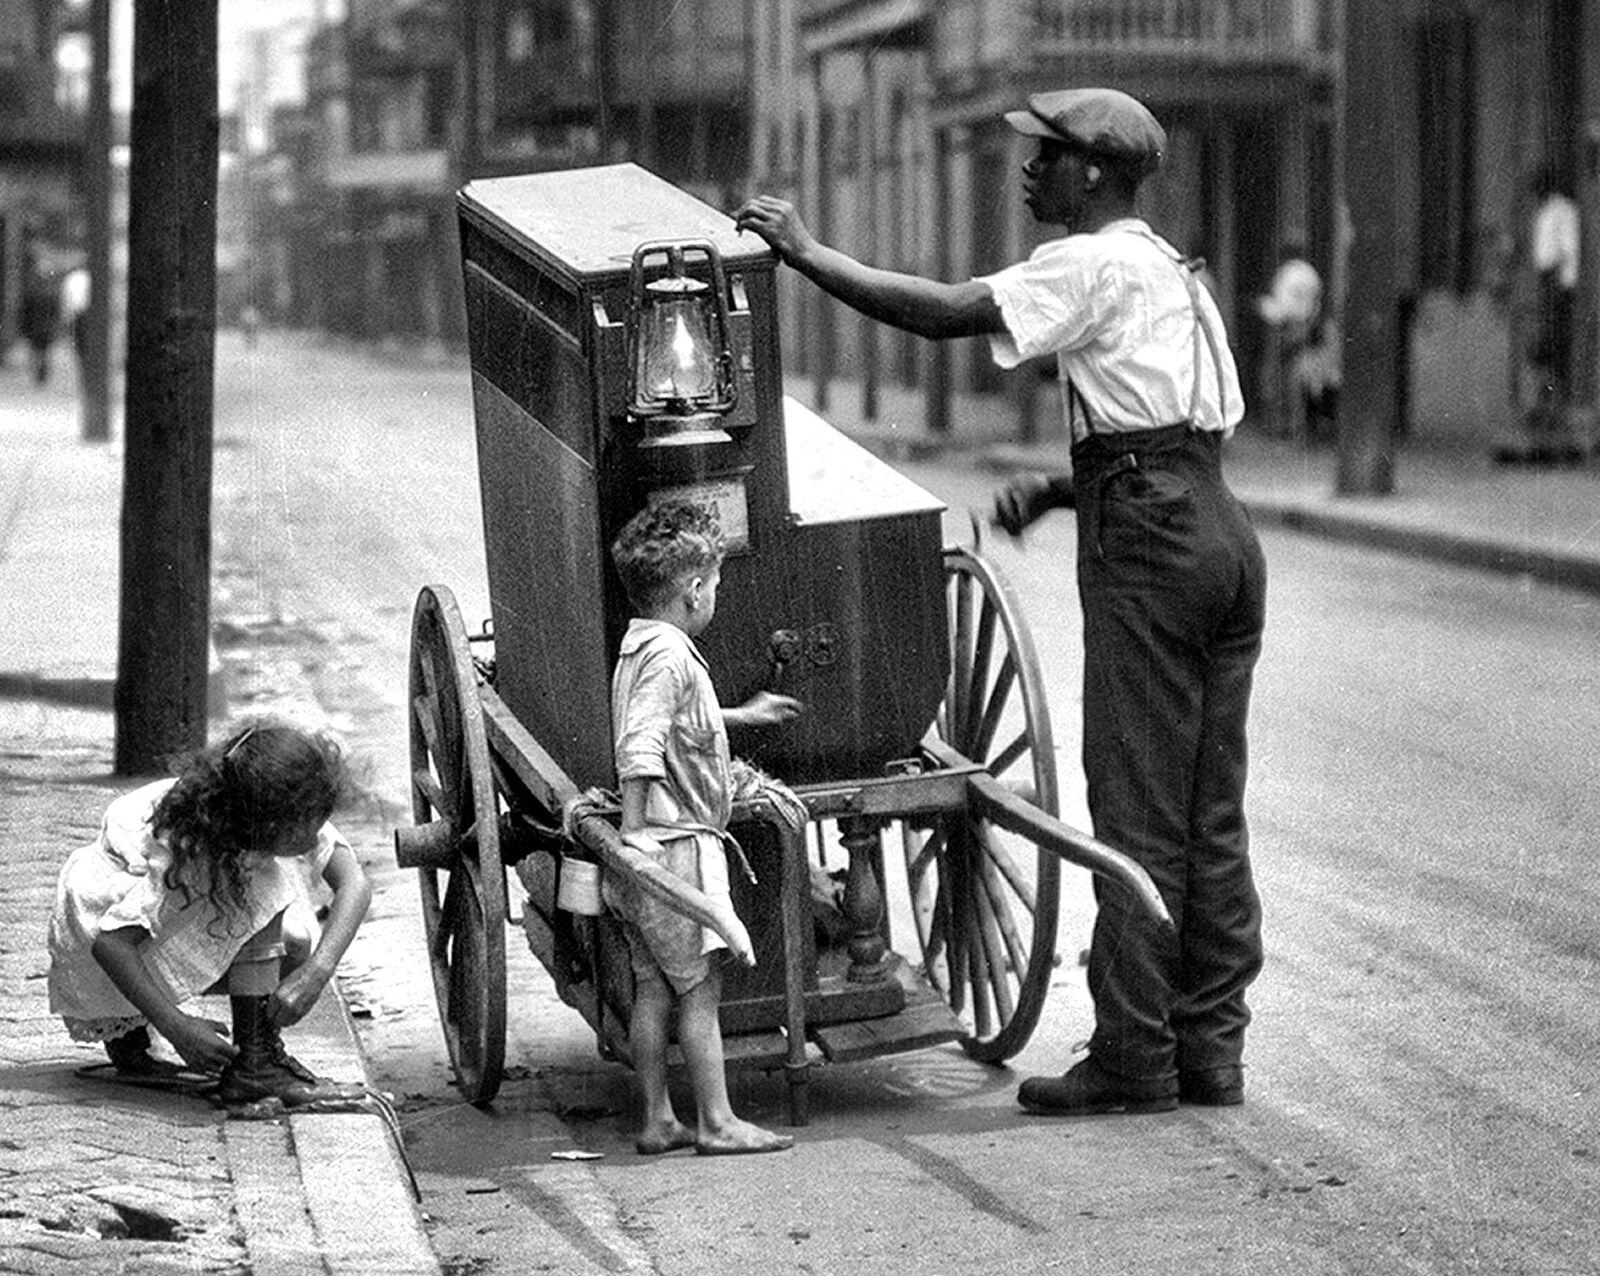 1924 ORGAN GRINDER on the Streets of New Orleans 8x10 Borderless PHOTO